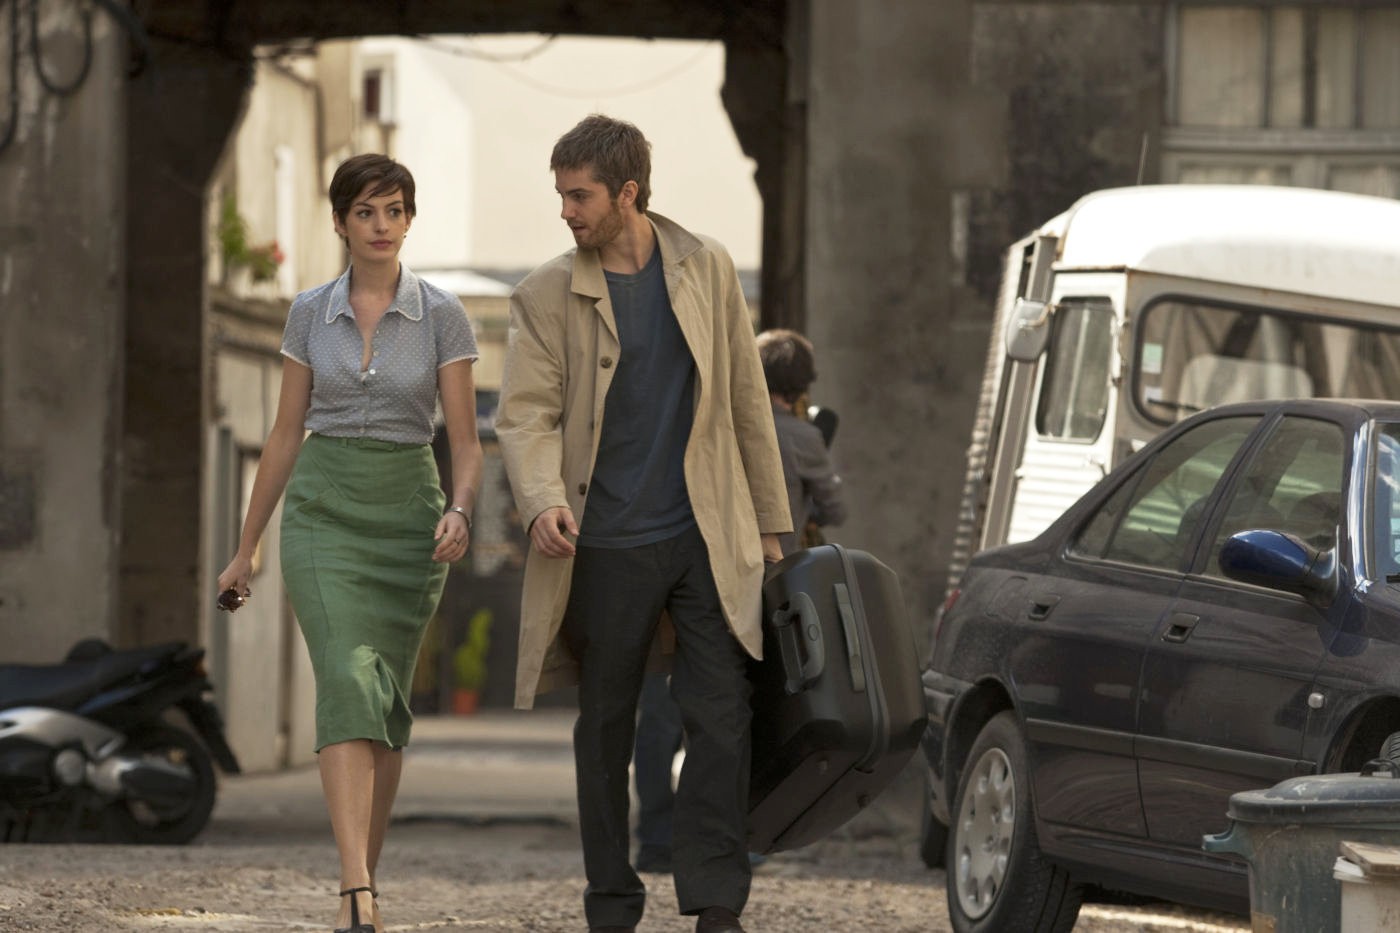 Anne Hathaway stars as Emma Morley and Jim Sturgess stars as Dexter Mayhew in Focus Features' One Day (2011)